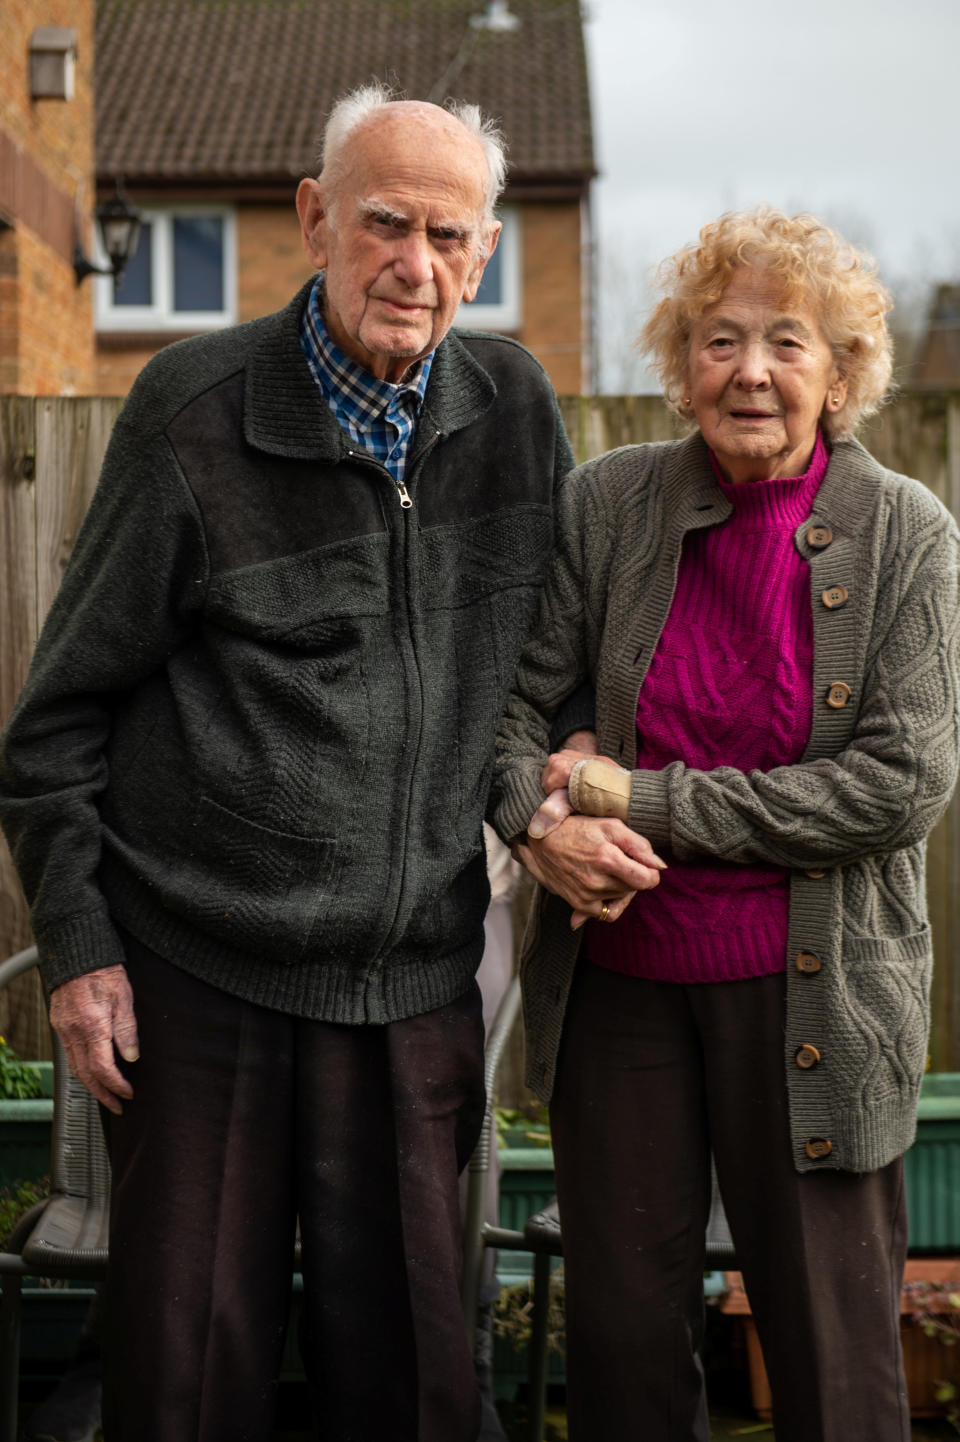 Ron (100) and Beryl (98) Golightly, who have been married for 80 years, pictured at home near Harrogate, North Yorks. See SWNS story SWLEcouple; A husband and wife who met in their teens have become one of Britain's longest married couples after they celebrated their 80th wedding anniversary. Ron Golightly met his beloved Beryl when he was just 16 when one of his pals wolf-whistled at his future wife's friends as they walked past the group in the street. A 14-year-old Beryl turned round to see what was going on and instantly fell in love with Ron's curly hair and cheeky smile and the pair have been inseparable ever since. Beryl, now 98, said of Ron, now 100: "I just knew as soon as I saw him I was going to marry him. â€œI was 14 and Ron was 16, it was very much love at first sight. â€œA couple of days later we spoke again and went for a walk, we were more or less a couple straight away. â€œI thought he had whistled at me and I just fell in love with his cheeky grin straight away.â€ The couple tied the knot in their hometown of Harrogate, North Yorks., in 1941 while Ron, who served in the Brigadier Guards, was on leave from the Army during World War II.